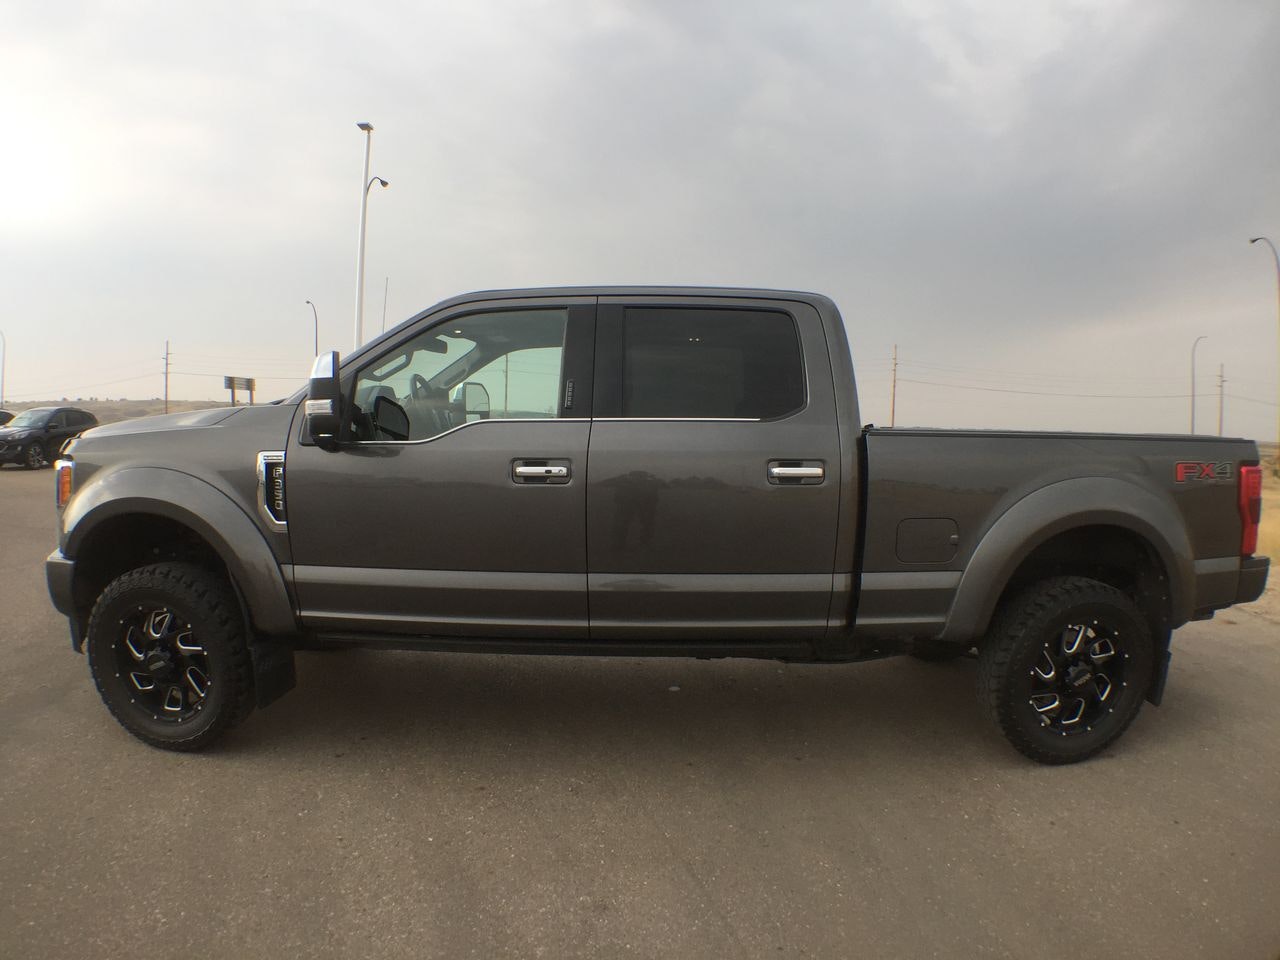 2019 Ford Super Duty F-350 Platinum FX4 MOON ROOF ULTIMATE PACKAGE (TS22089A) Main Image